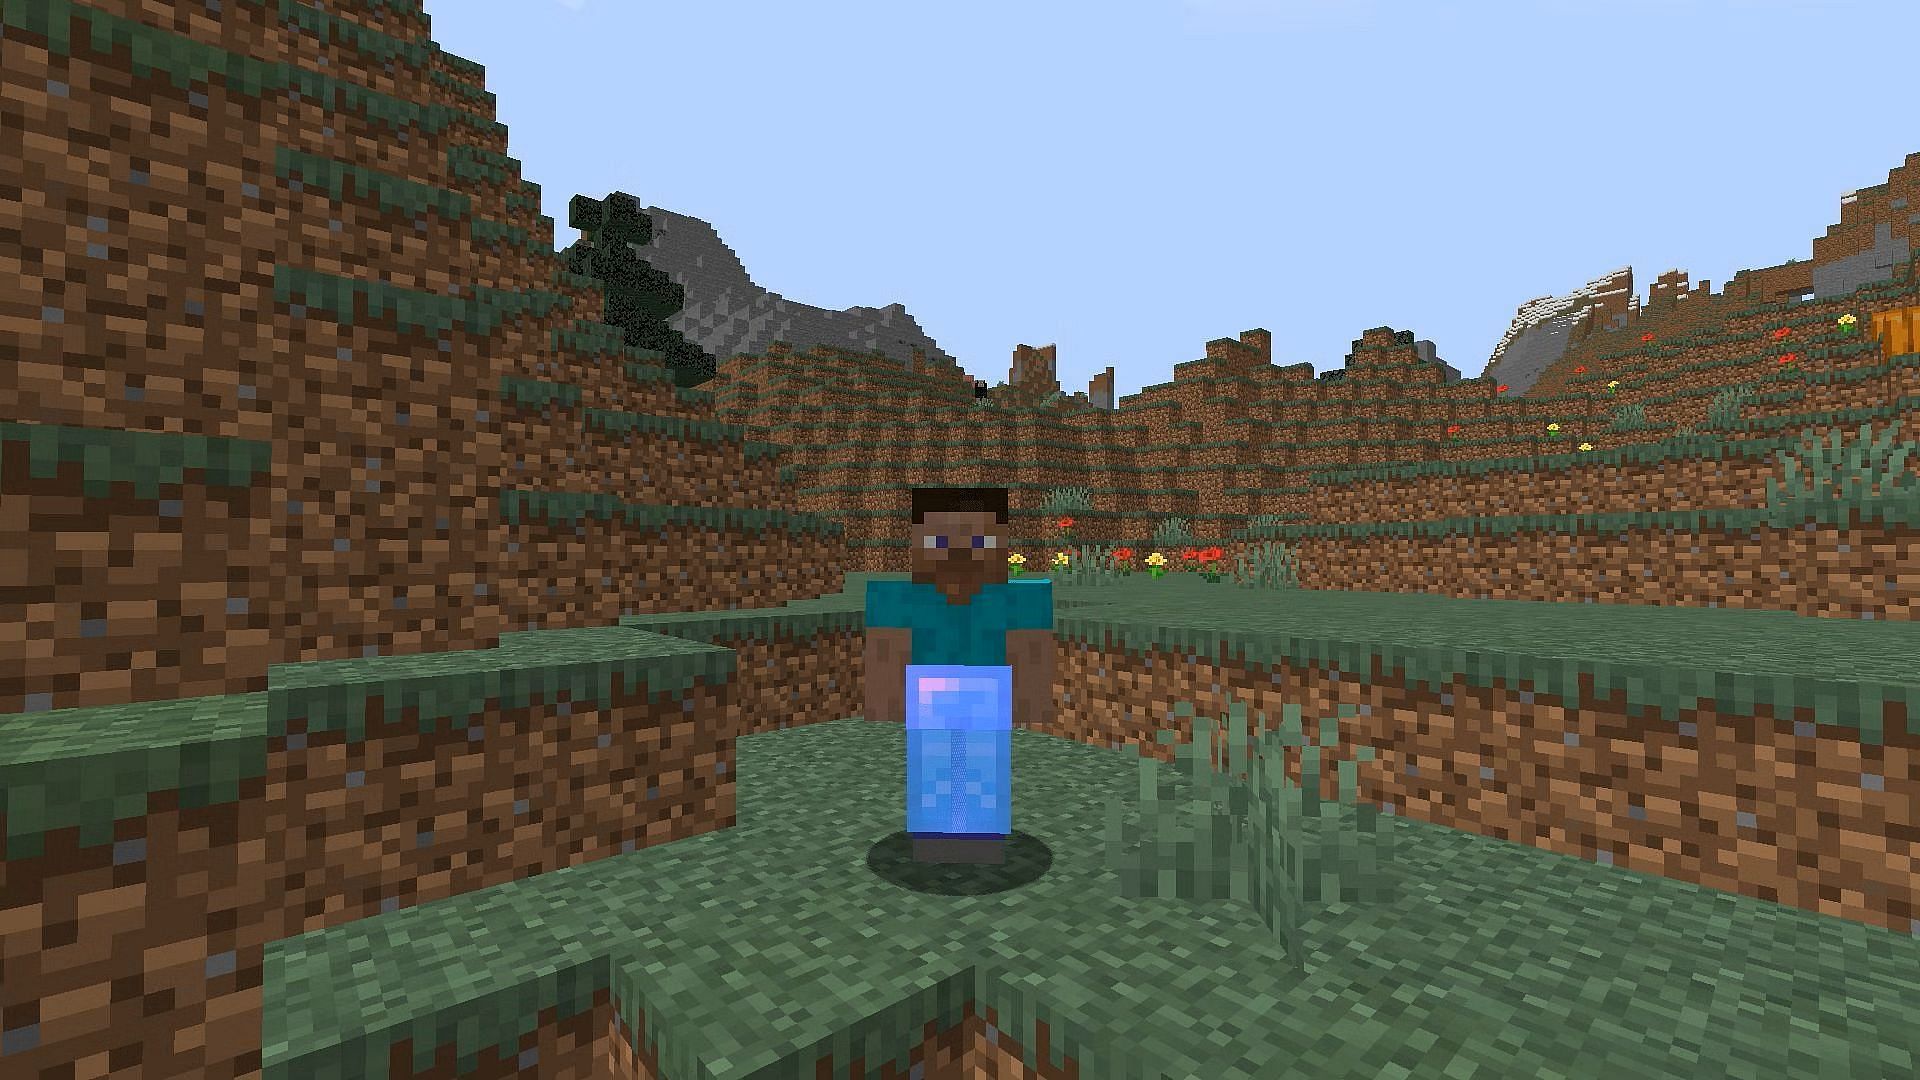 The Swift Sneak enchantment can only be applied to leggings in Minecraft (Image via Mojang)